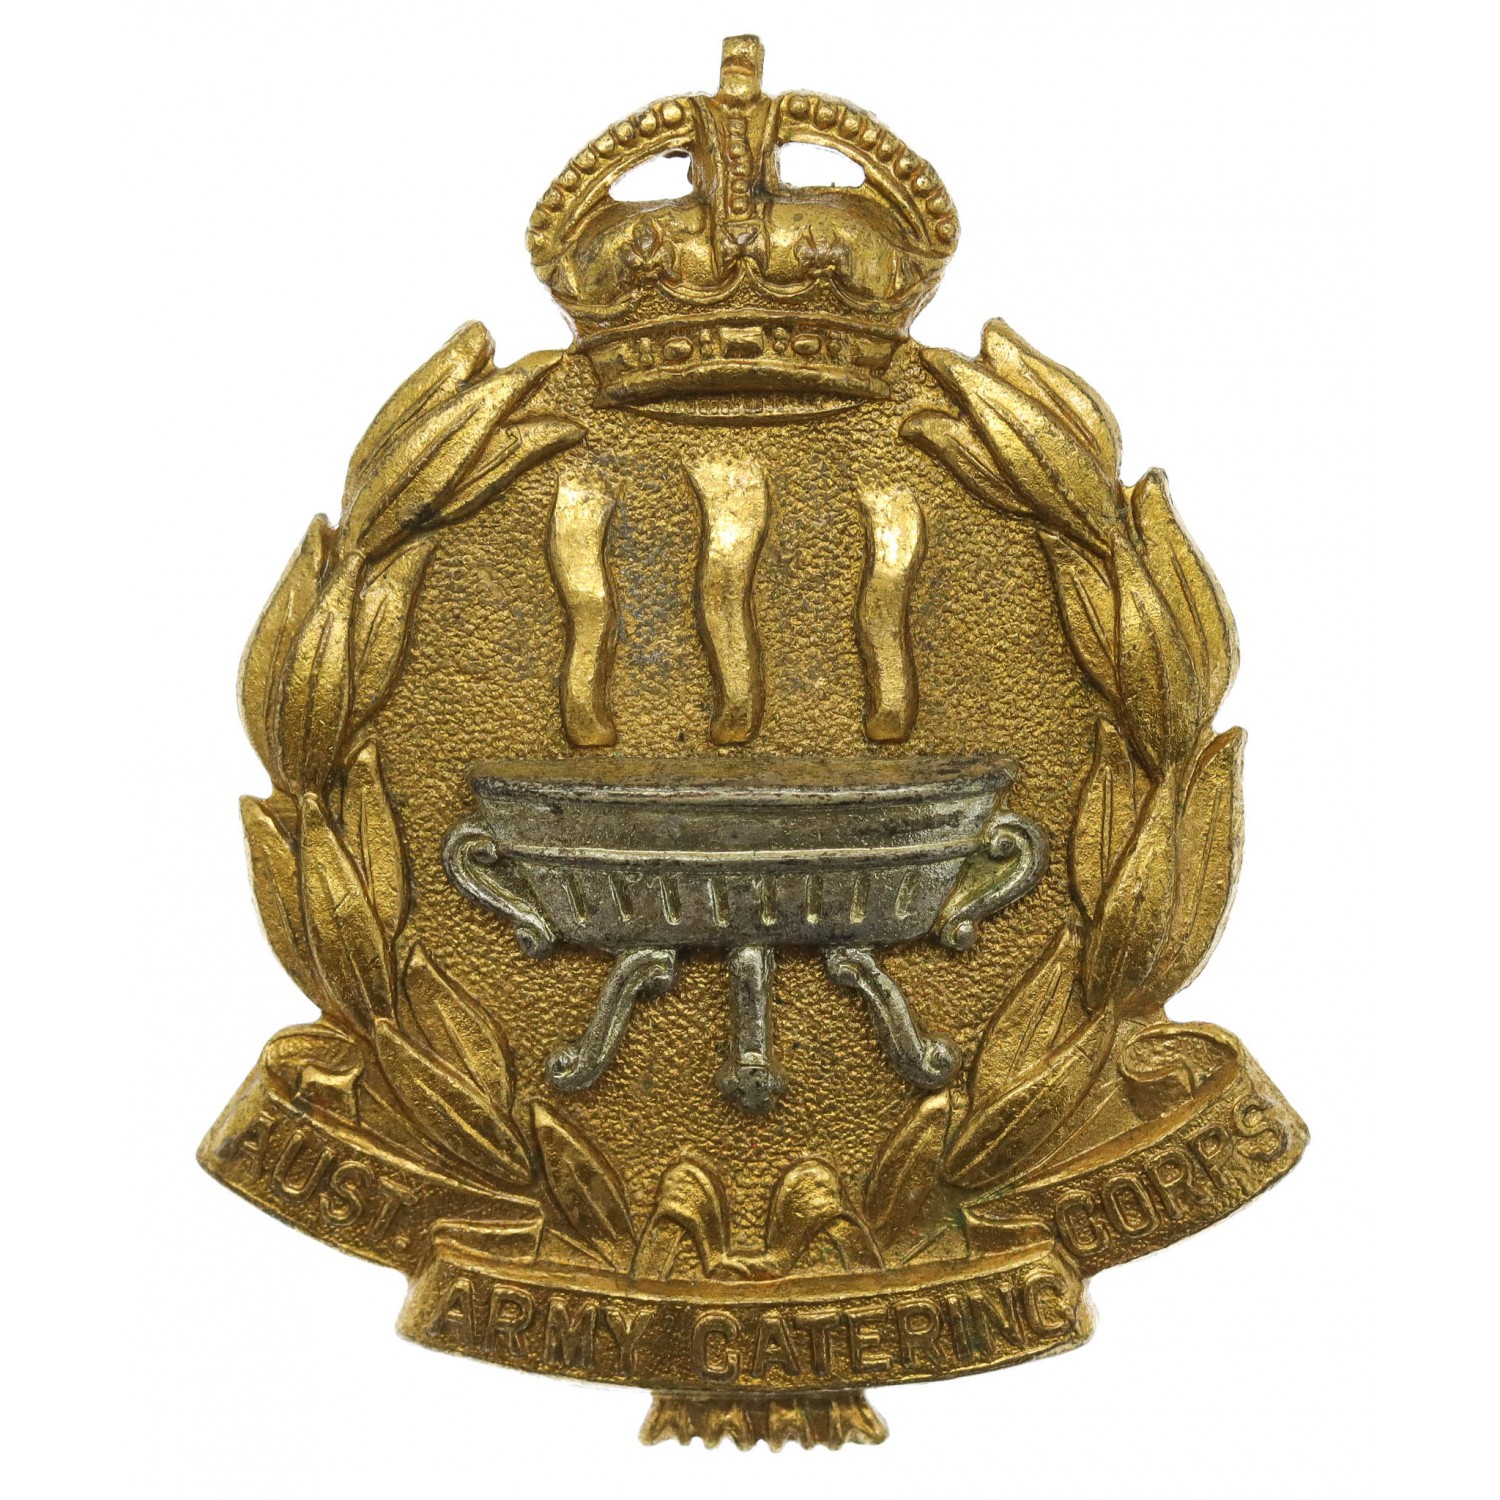 Army catering corps cap badge